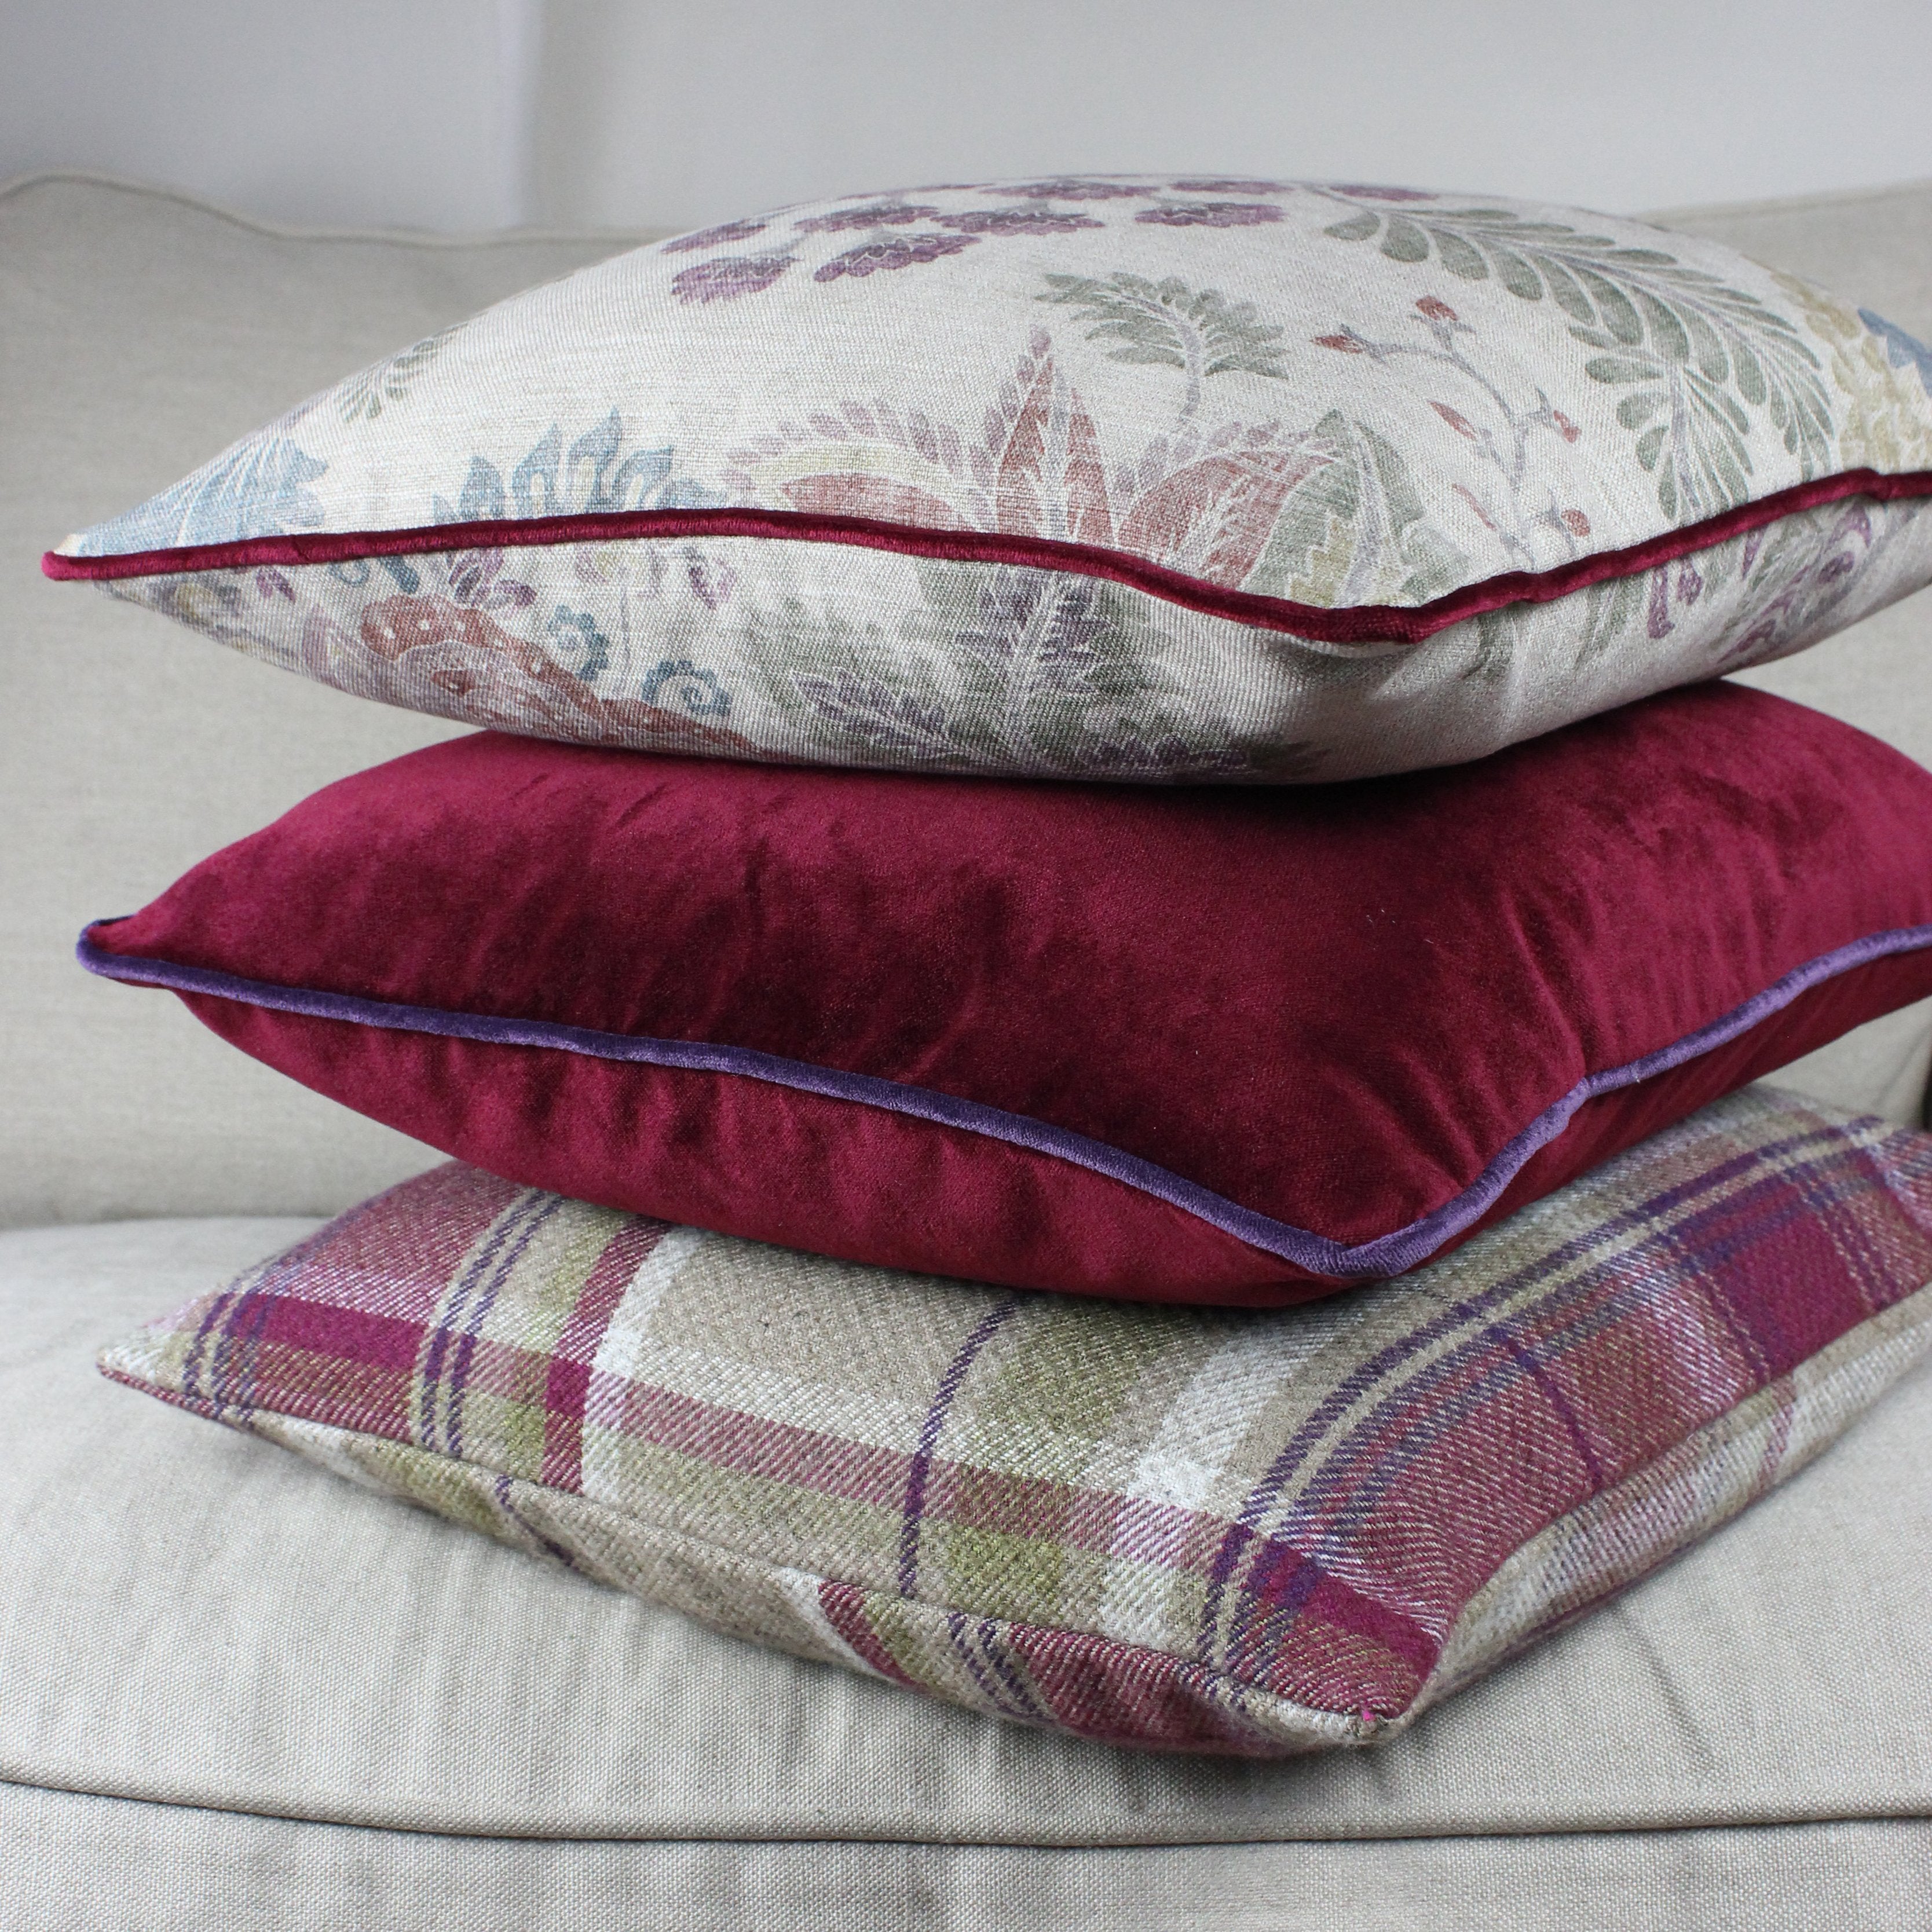 McAlister Textiles Floris Vintage Floral Linen Cushion Cushions and Covers 